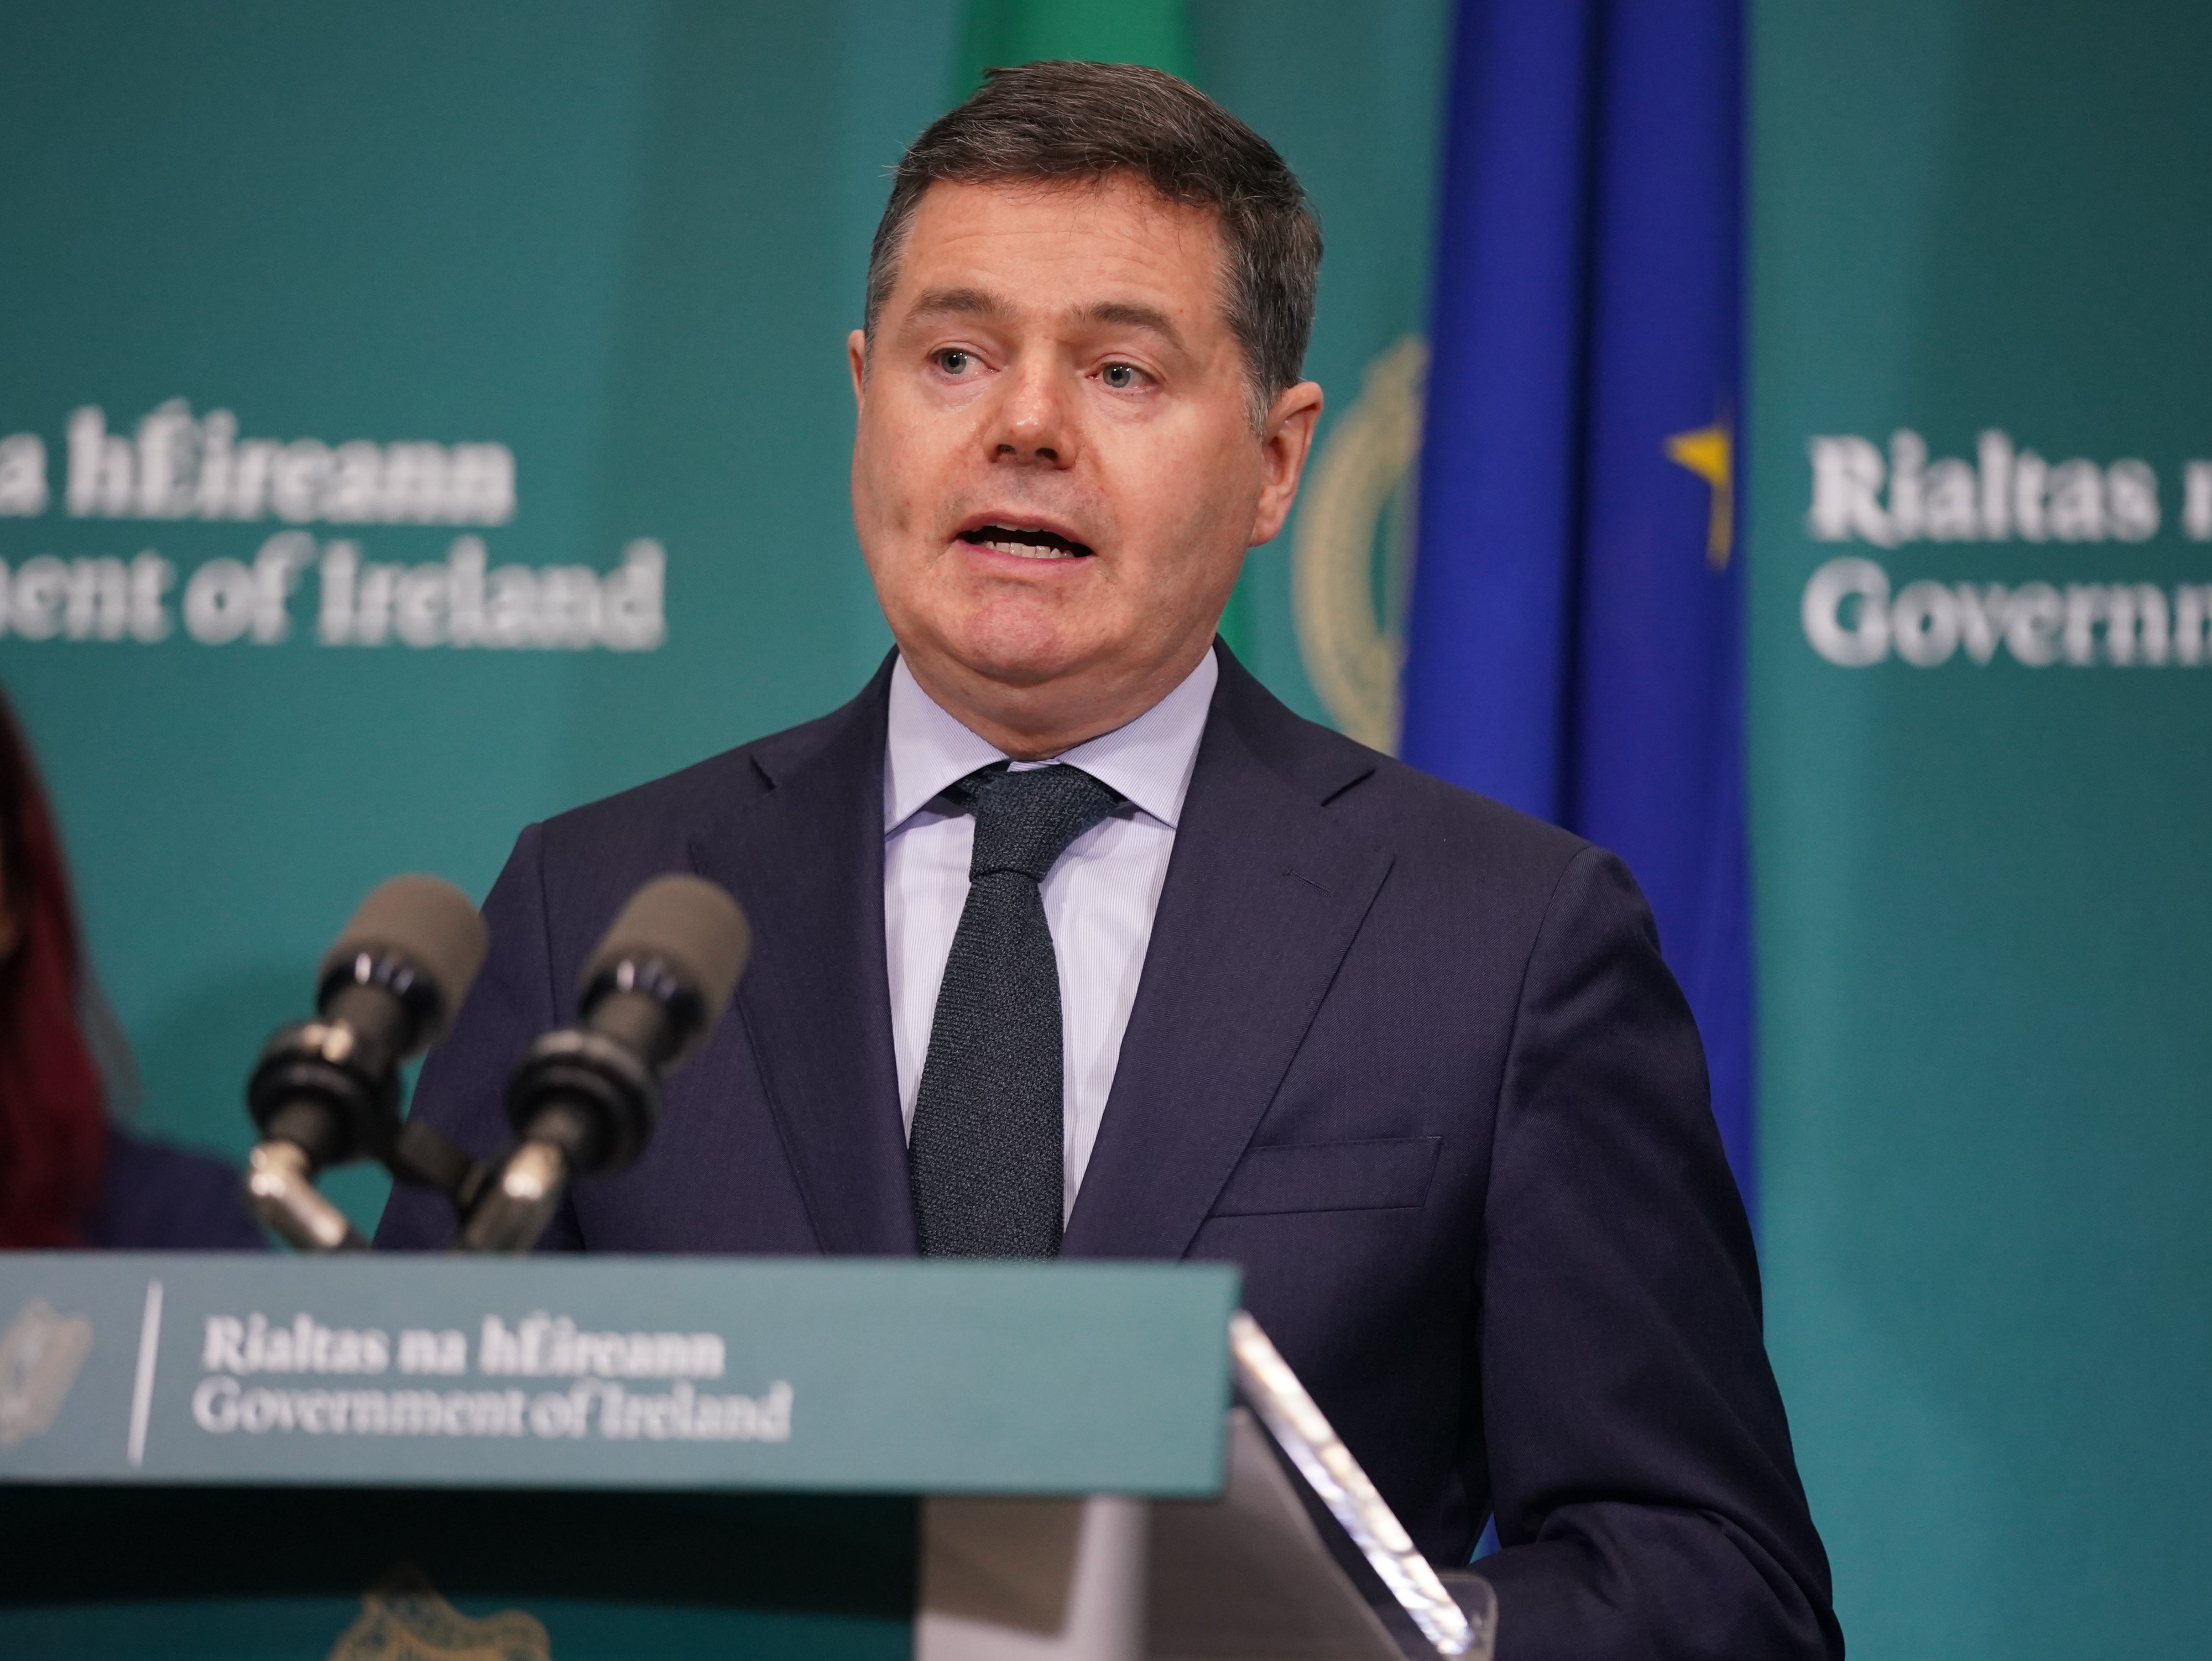 Minister for Finance, Paschal Donohoe, said he expects further sanctions against Russia and those connected to Vladimir Putin to be announced in the coming days (Niall Carson/PA)